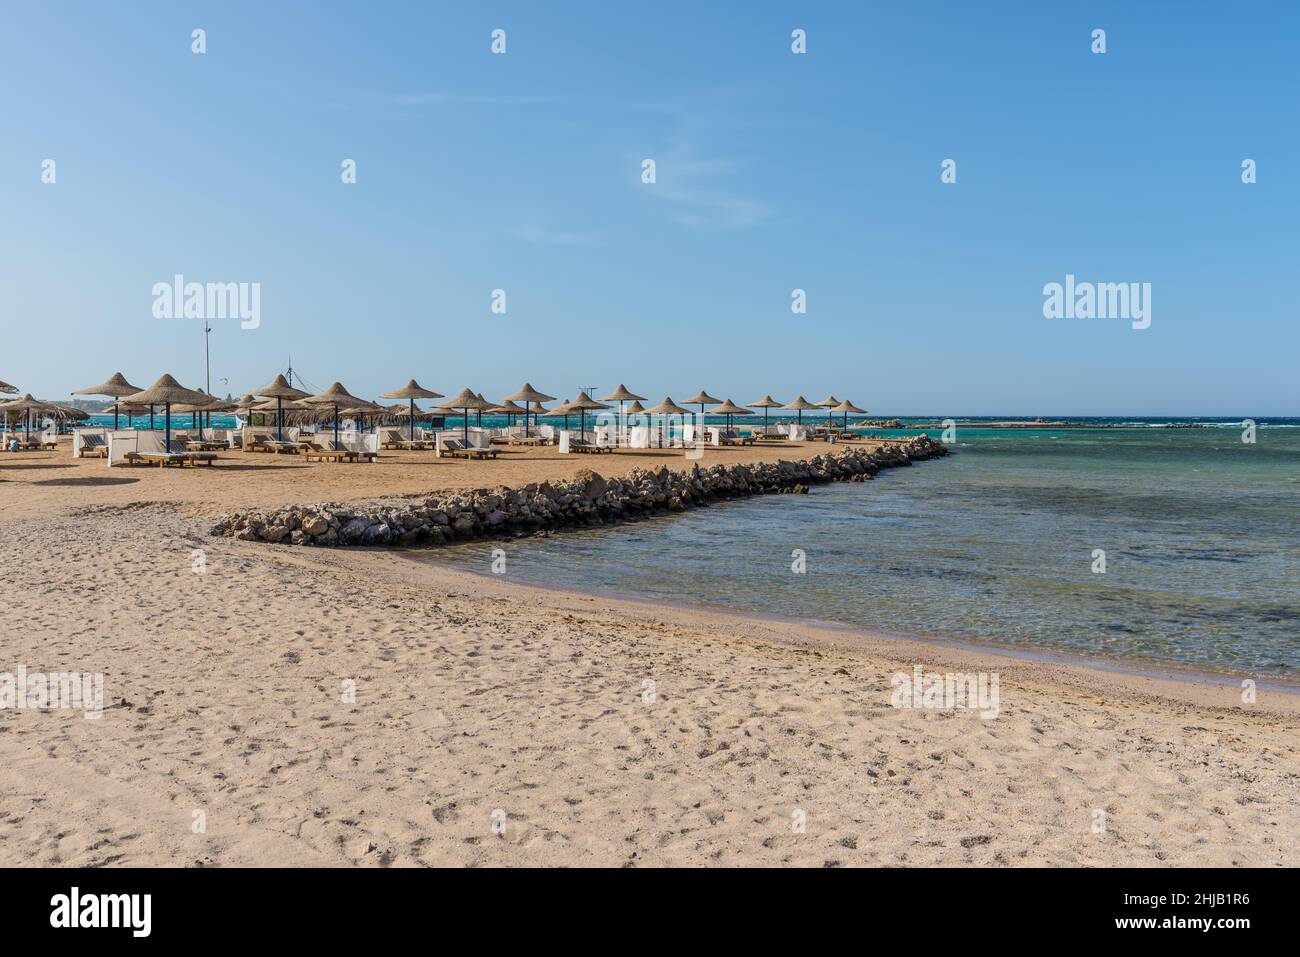 Hurghada, Egypt - June 03, 2021: Umbrellas and sun loungers on an empty beach of the Royal Pharaohs Makadi Bay, which one of Egypt beautiful Red Sea R Stock Photo